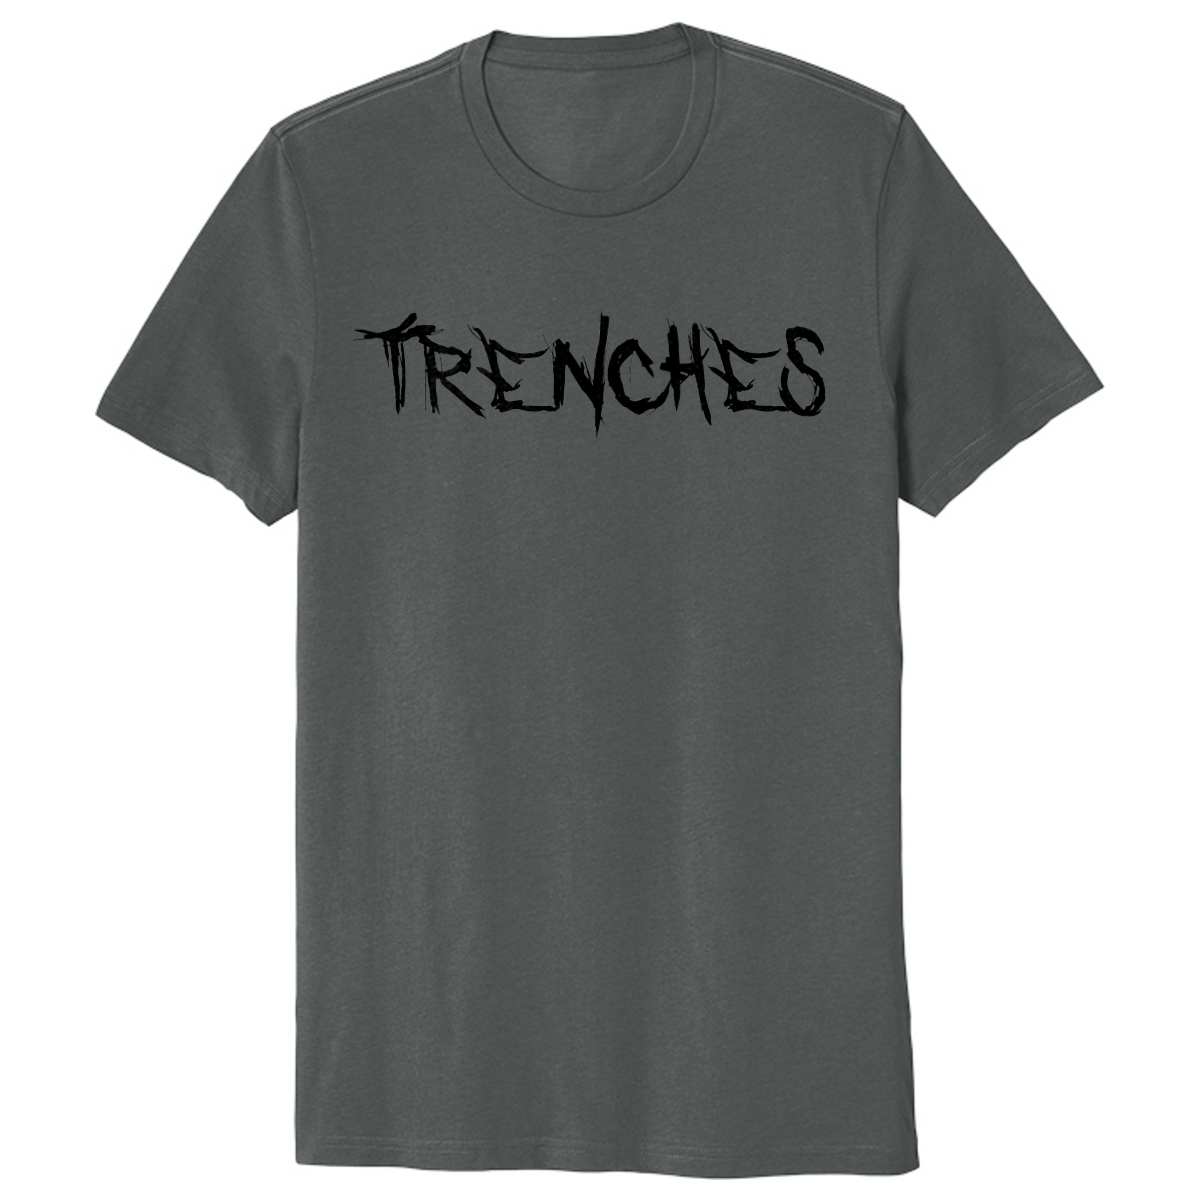 GT Williams Trenches Organic T